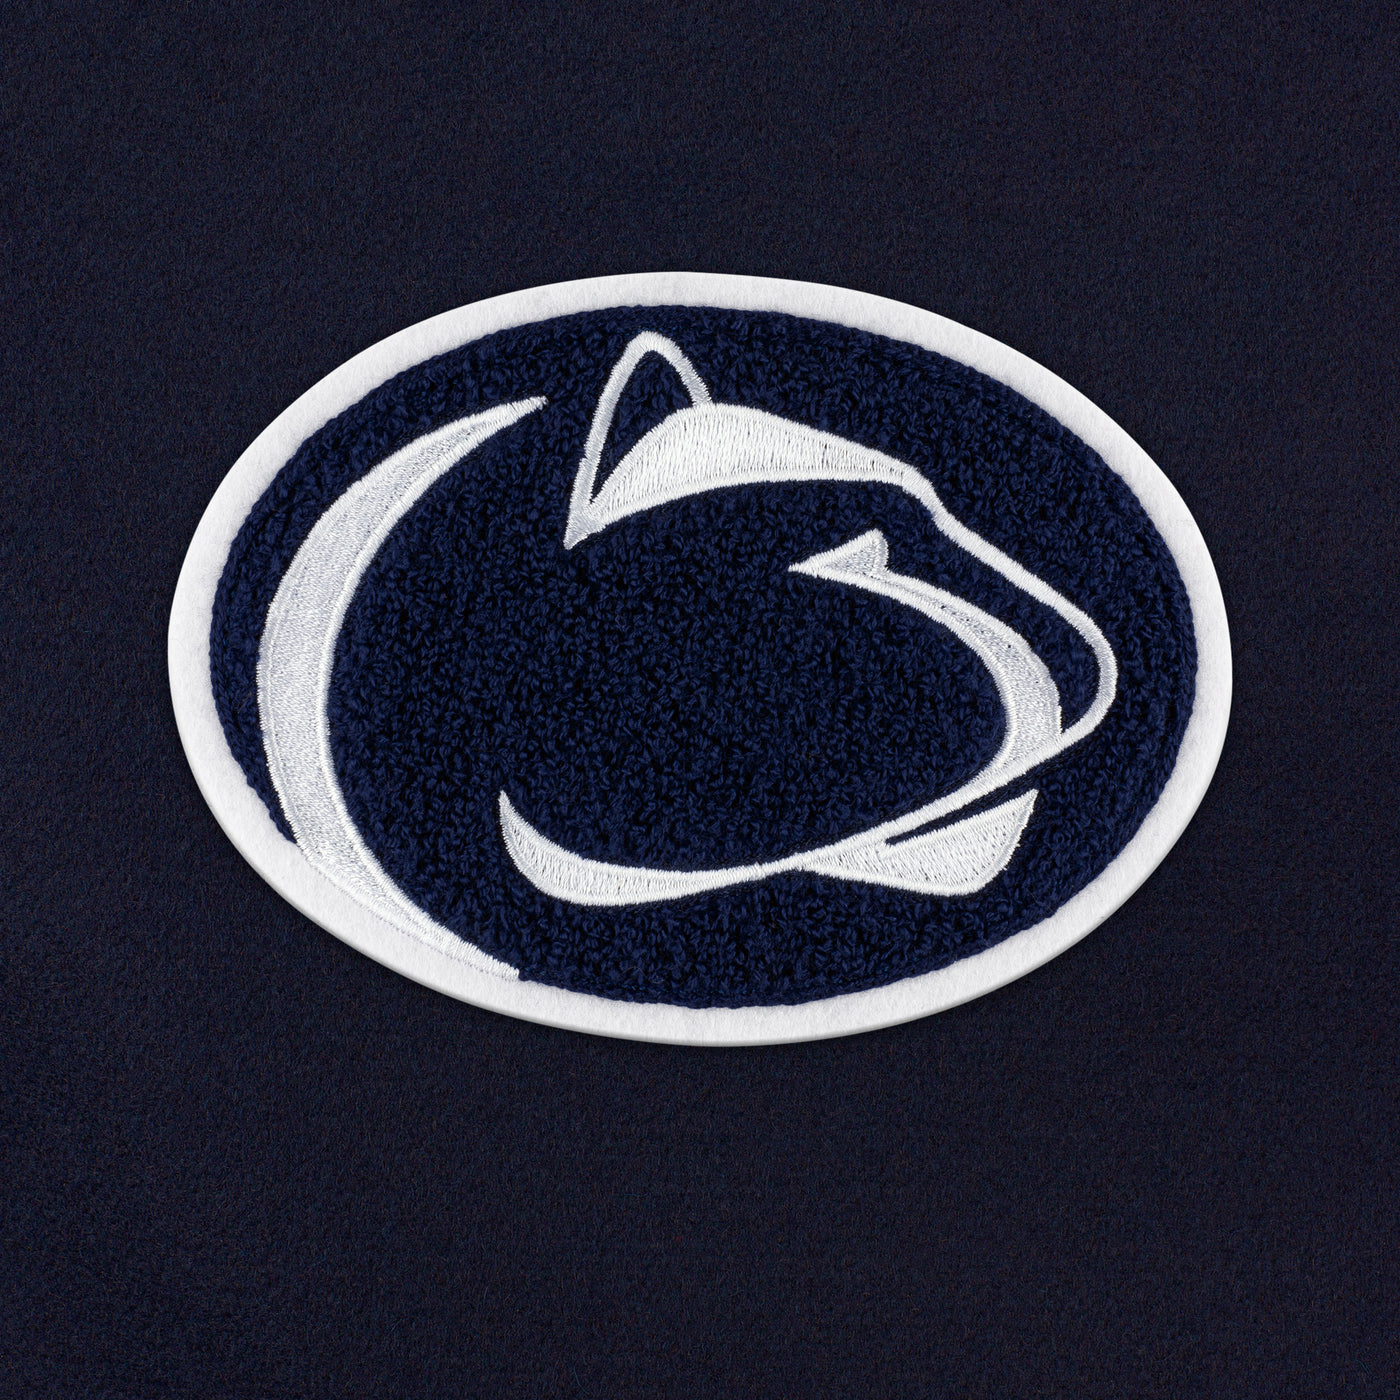 Penn State "Nittany Lion" Tote